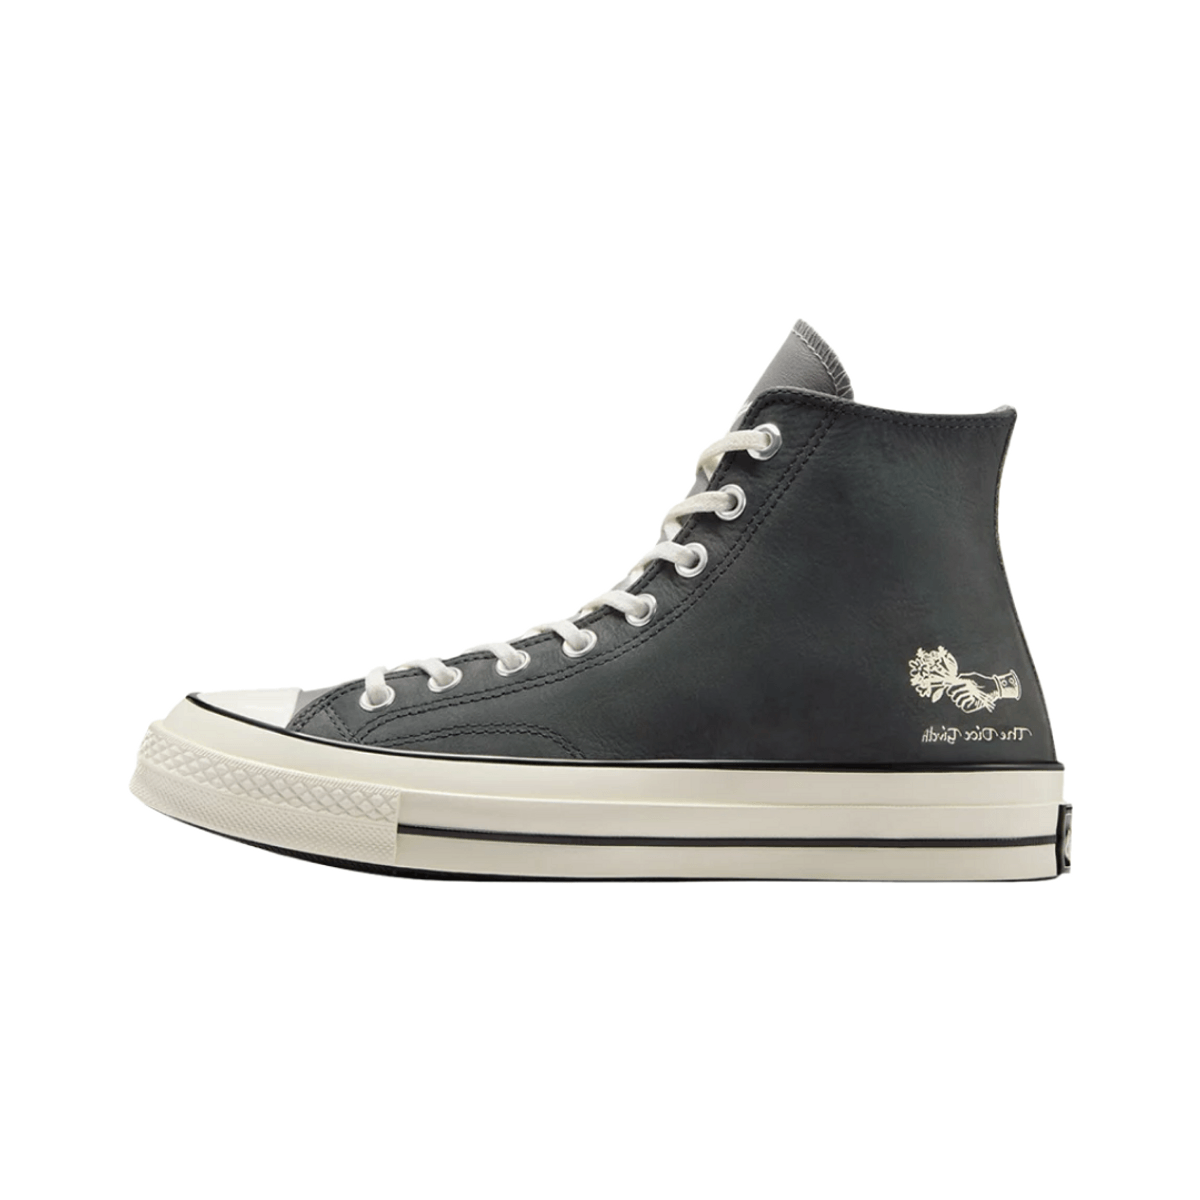 Dungeons & Dragons x Converse Chuck 70 Leather Black Grey